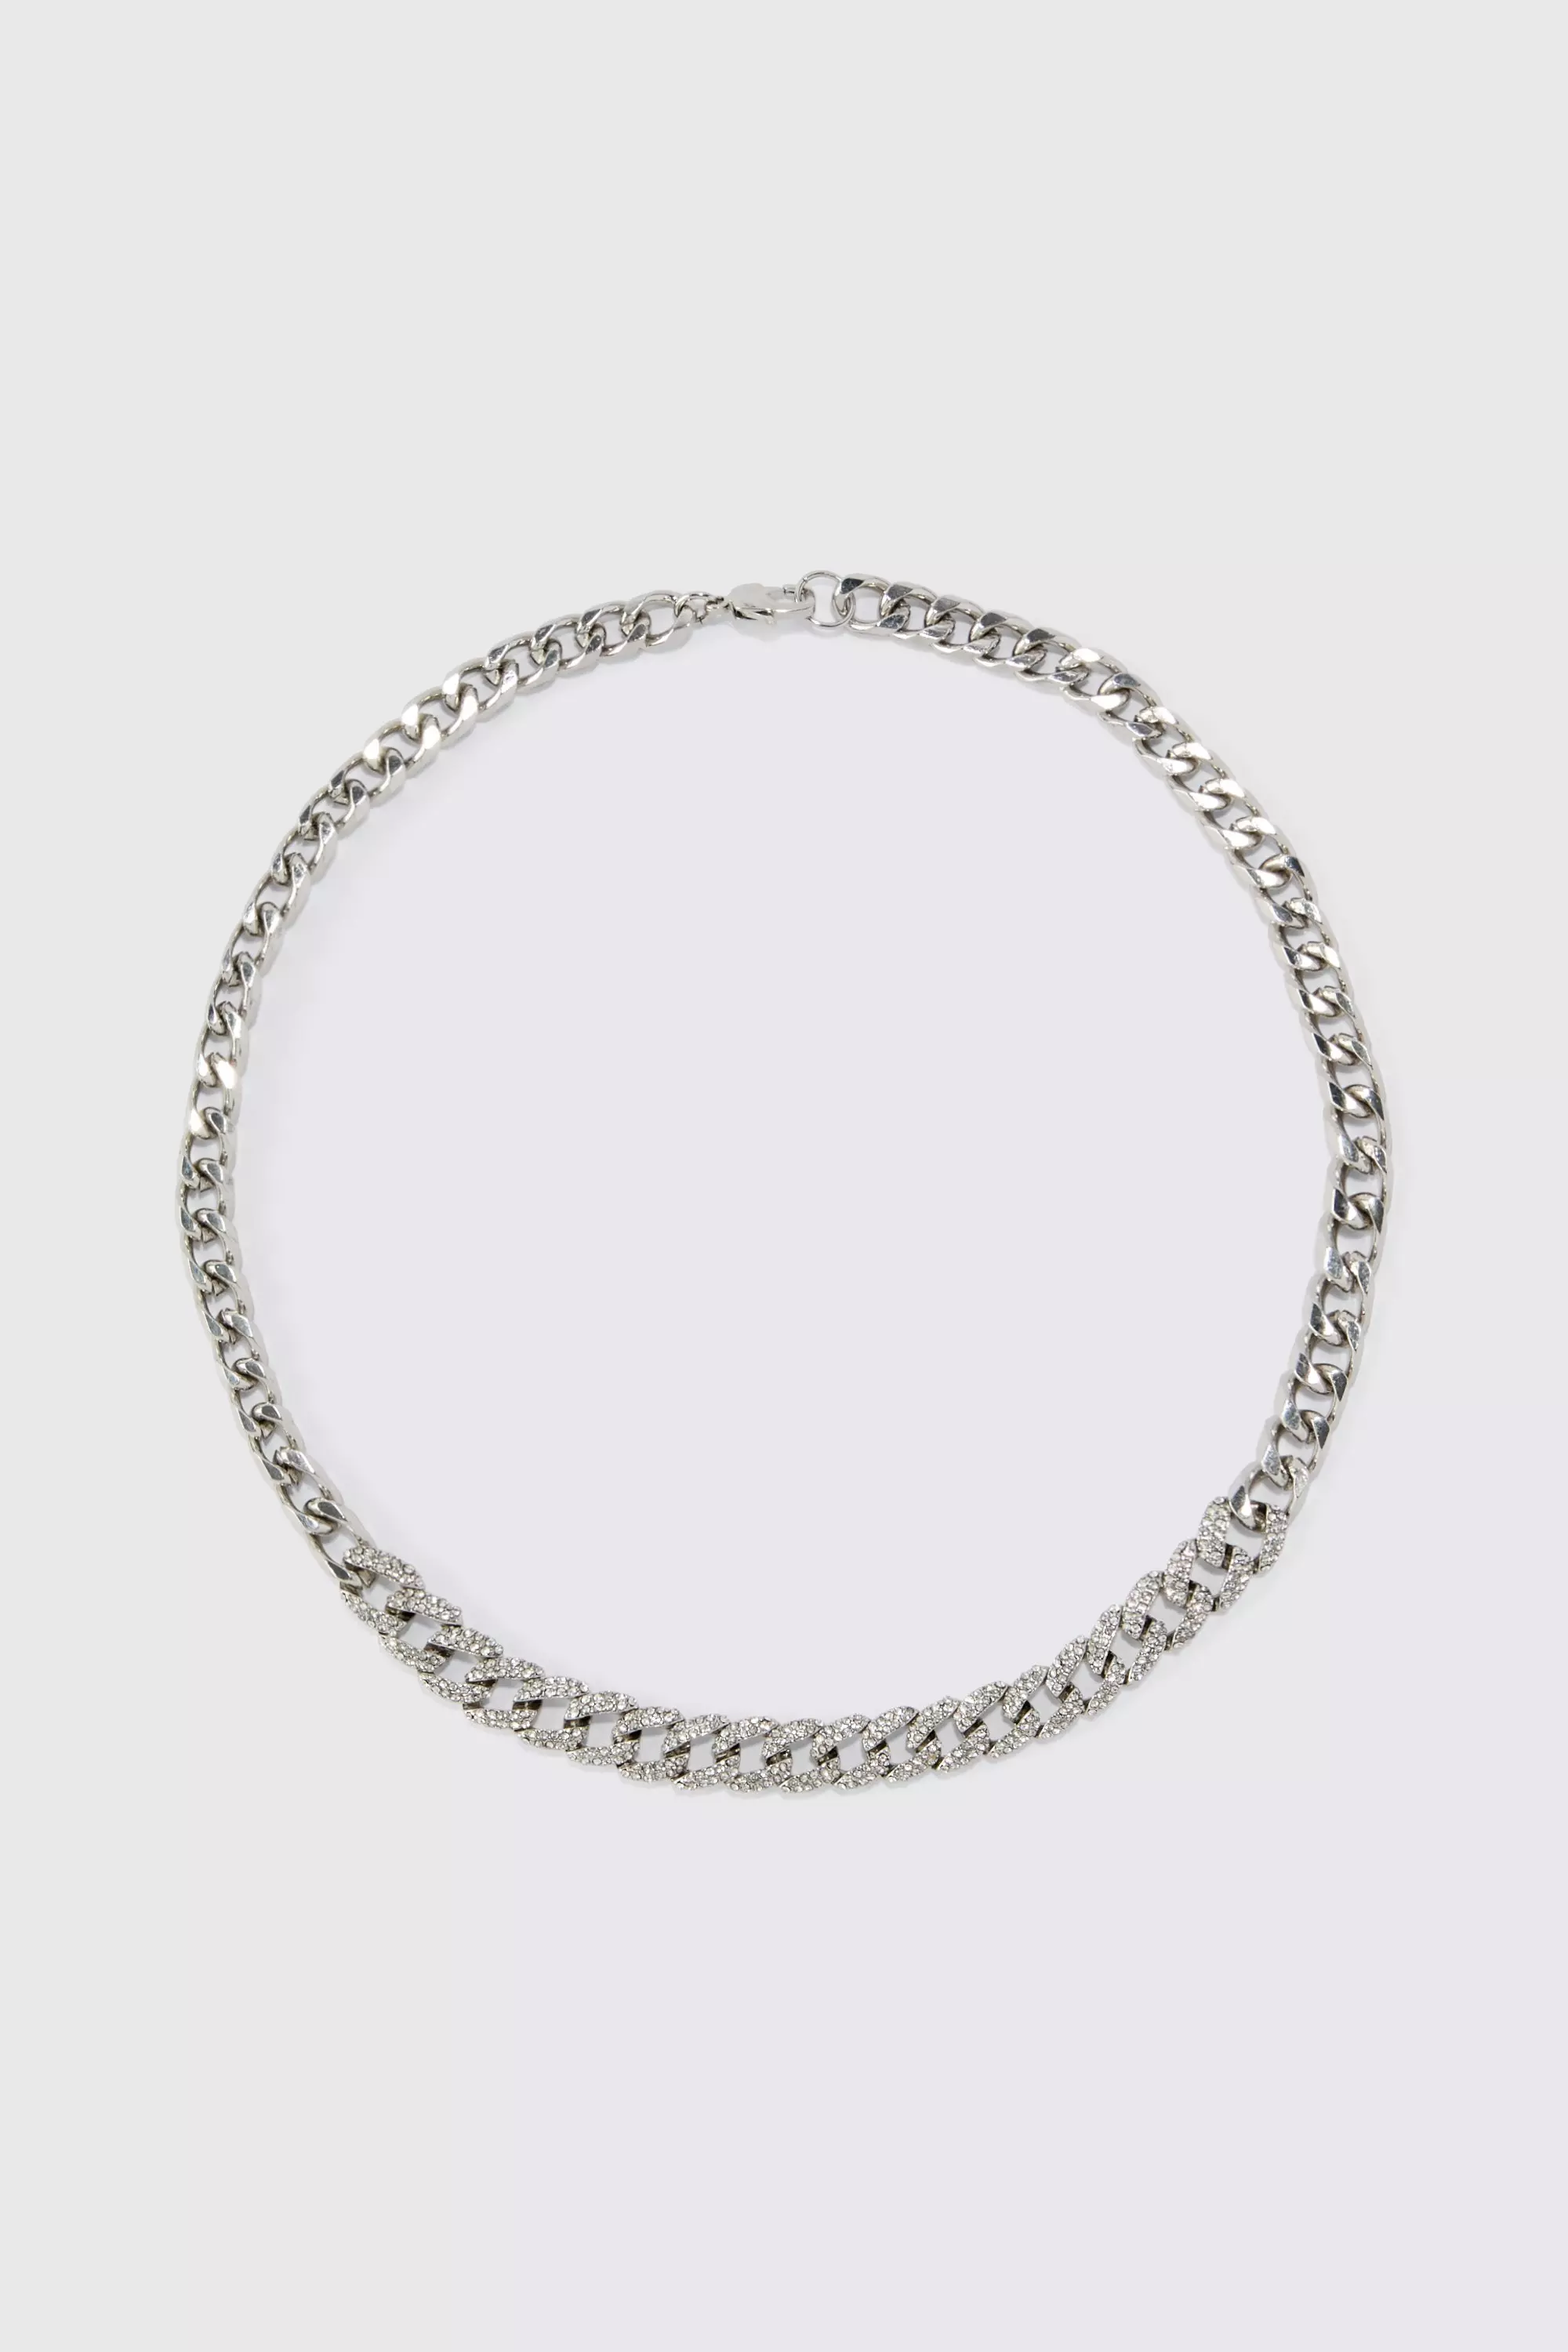 Silver Iced Chain Necklace